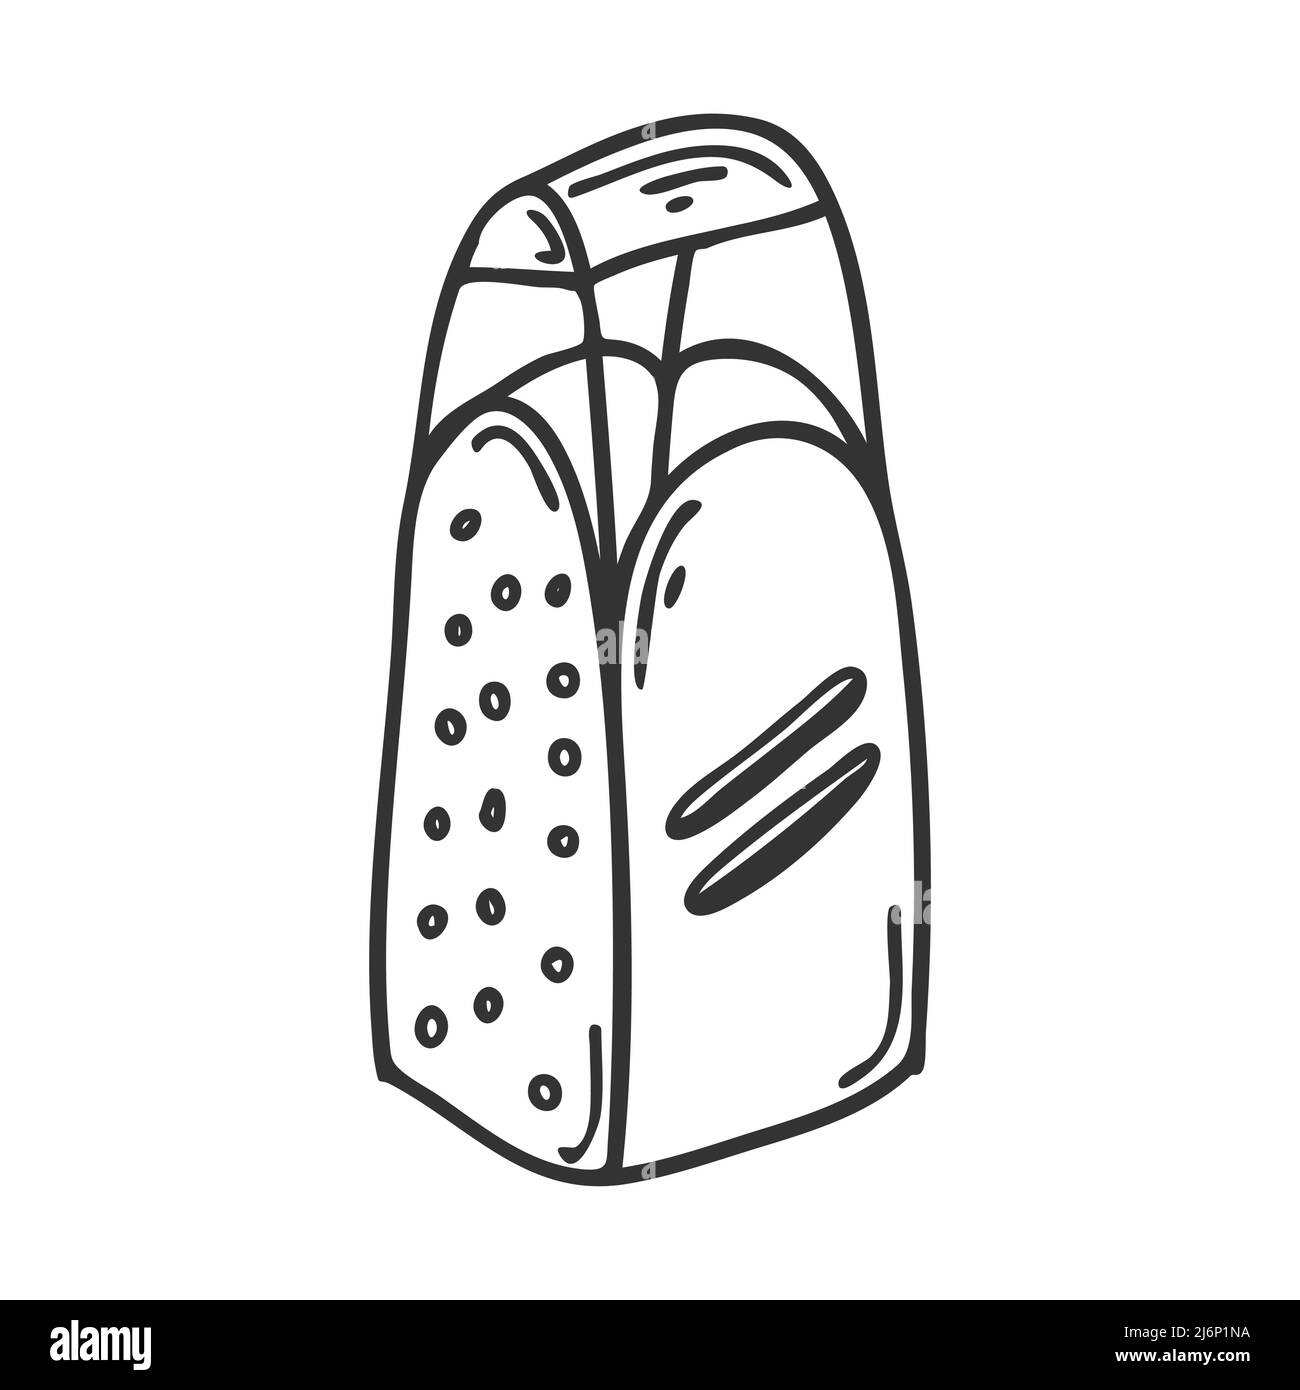 Kitchen grater in Doodle style. Utensils for chopping vegetables Element for menu design, recipes,food packaging, and cooking magazines.Hand-drawn and Stock Vector